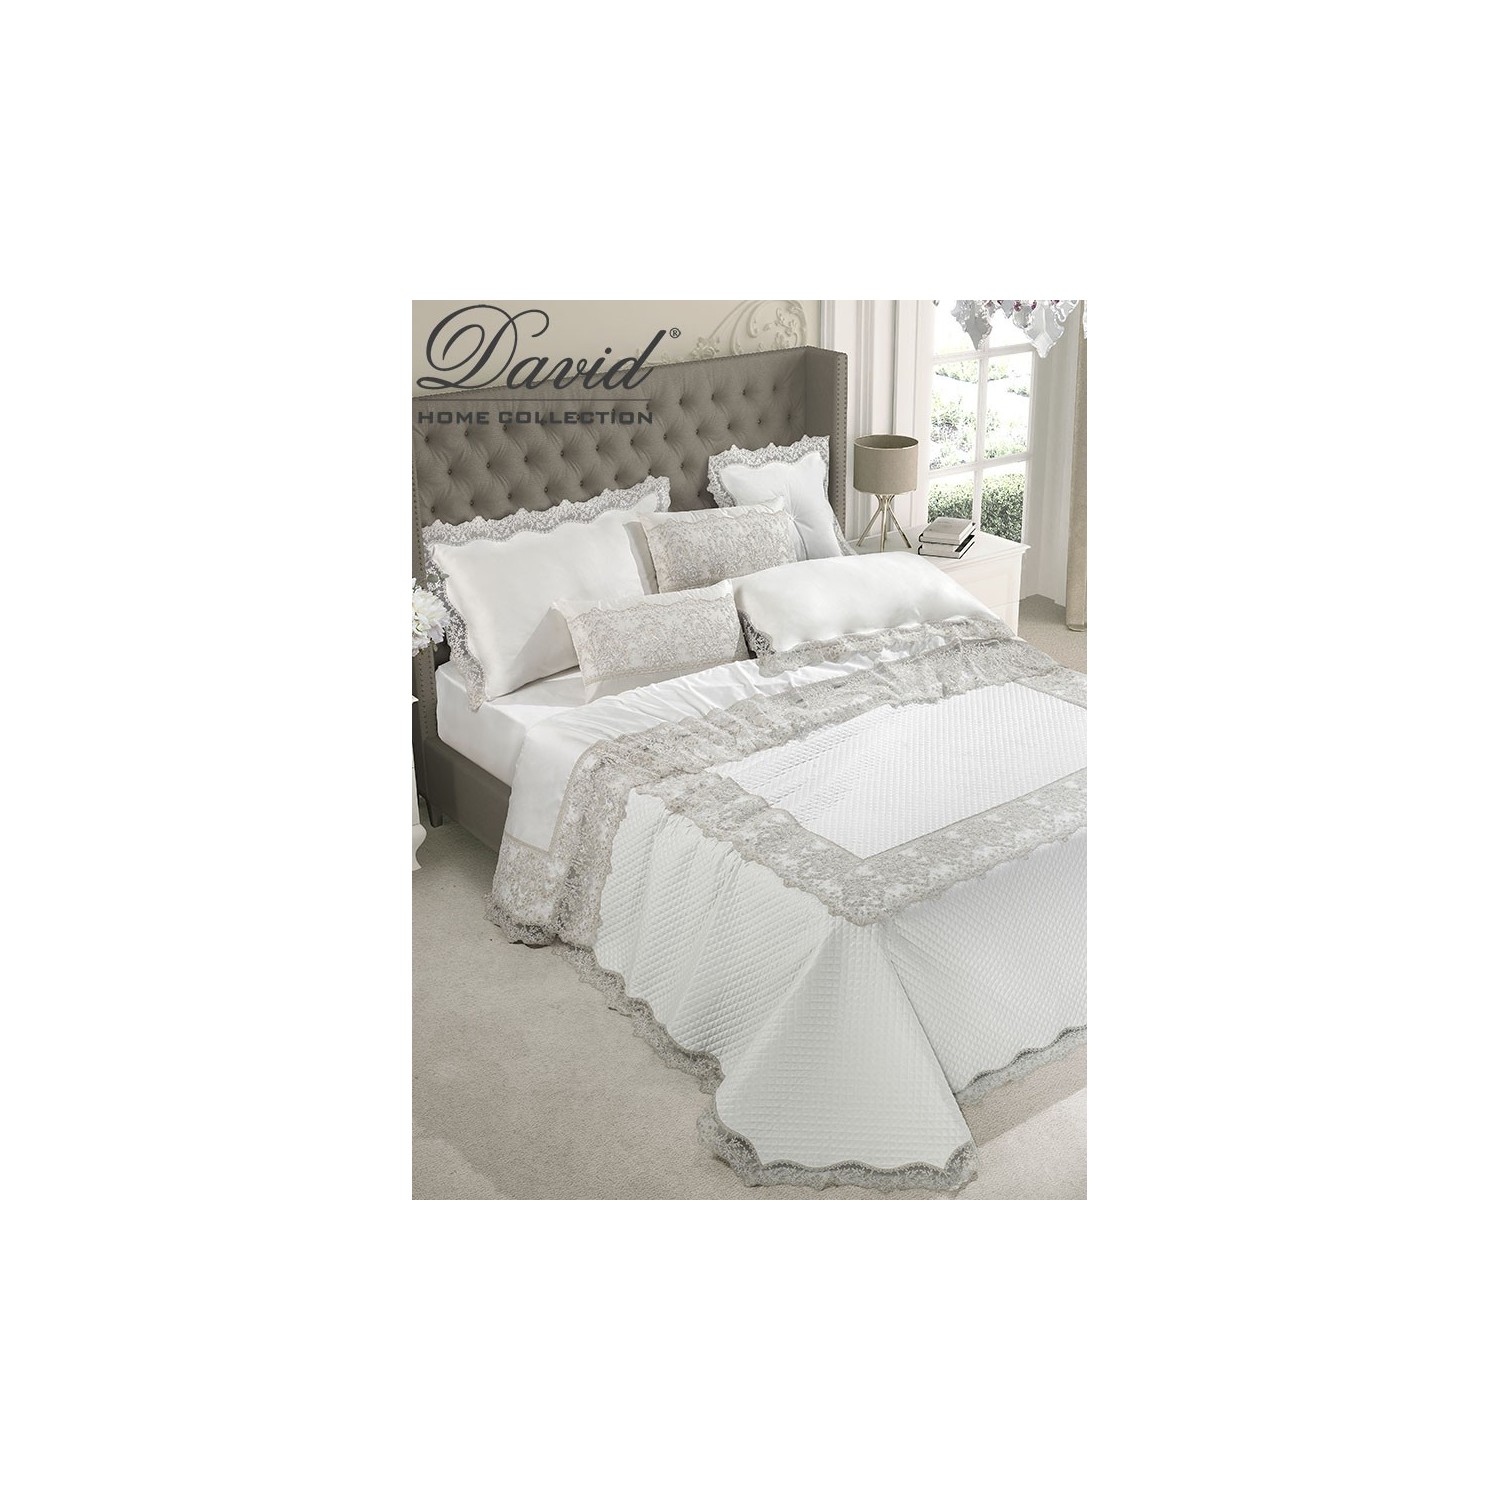 DIANA - Classic collection DAVID HOME